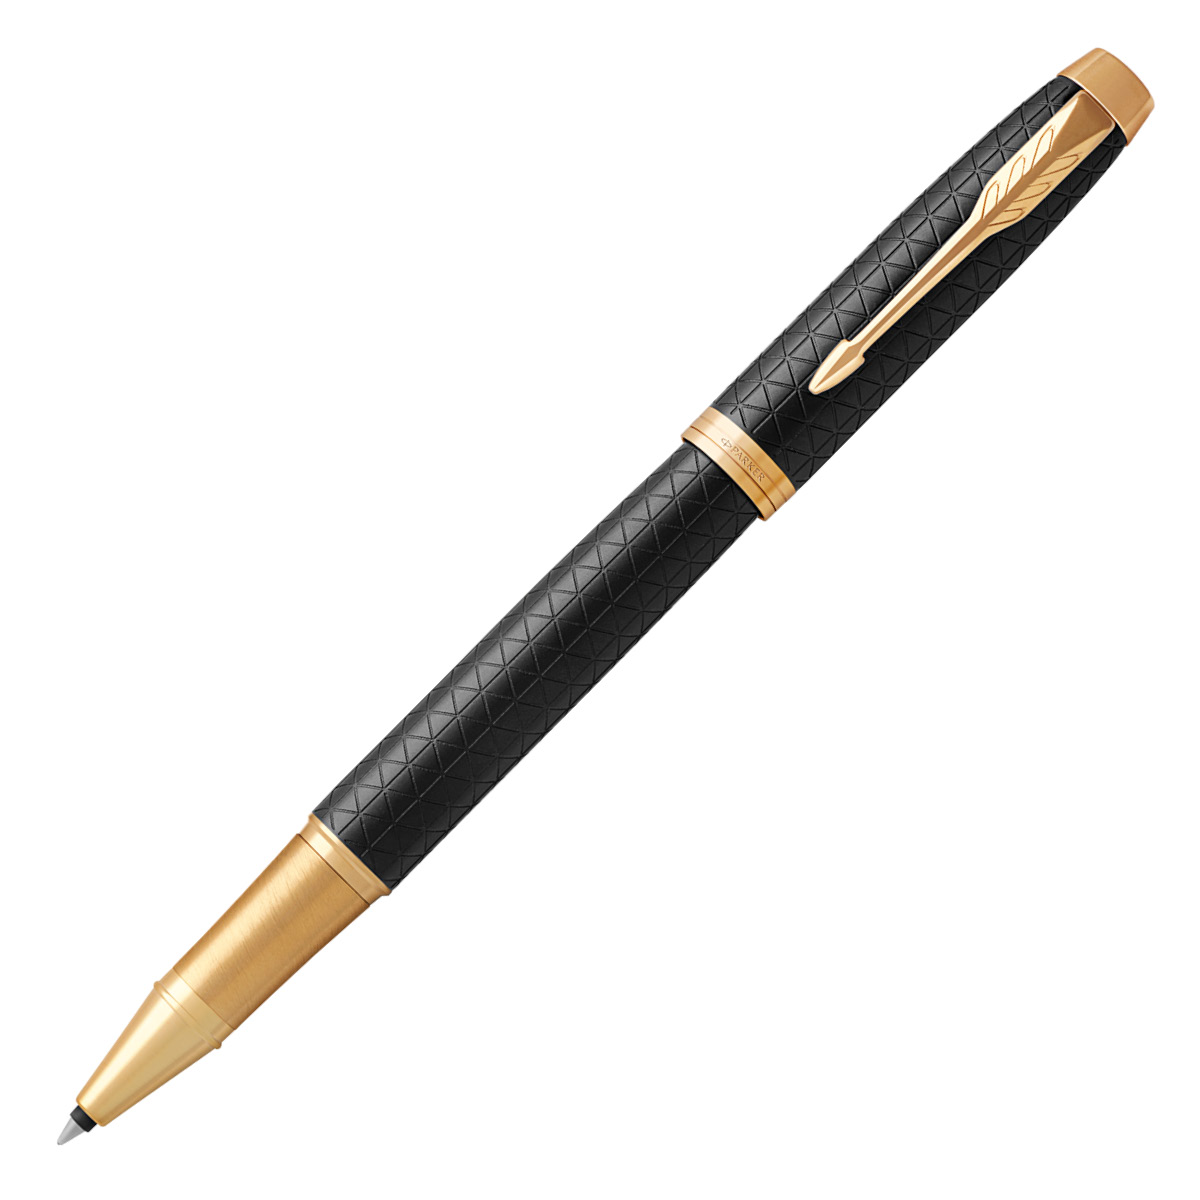 IM Premium Black/Gold Rollerball in the group Pens / Fine Writing / Rollerball Pens at Pen Store (112685)